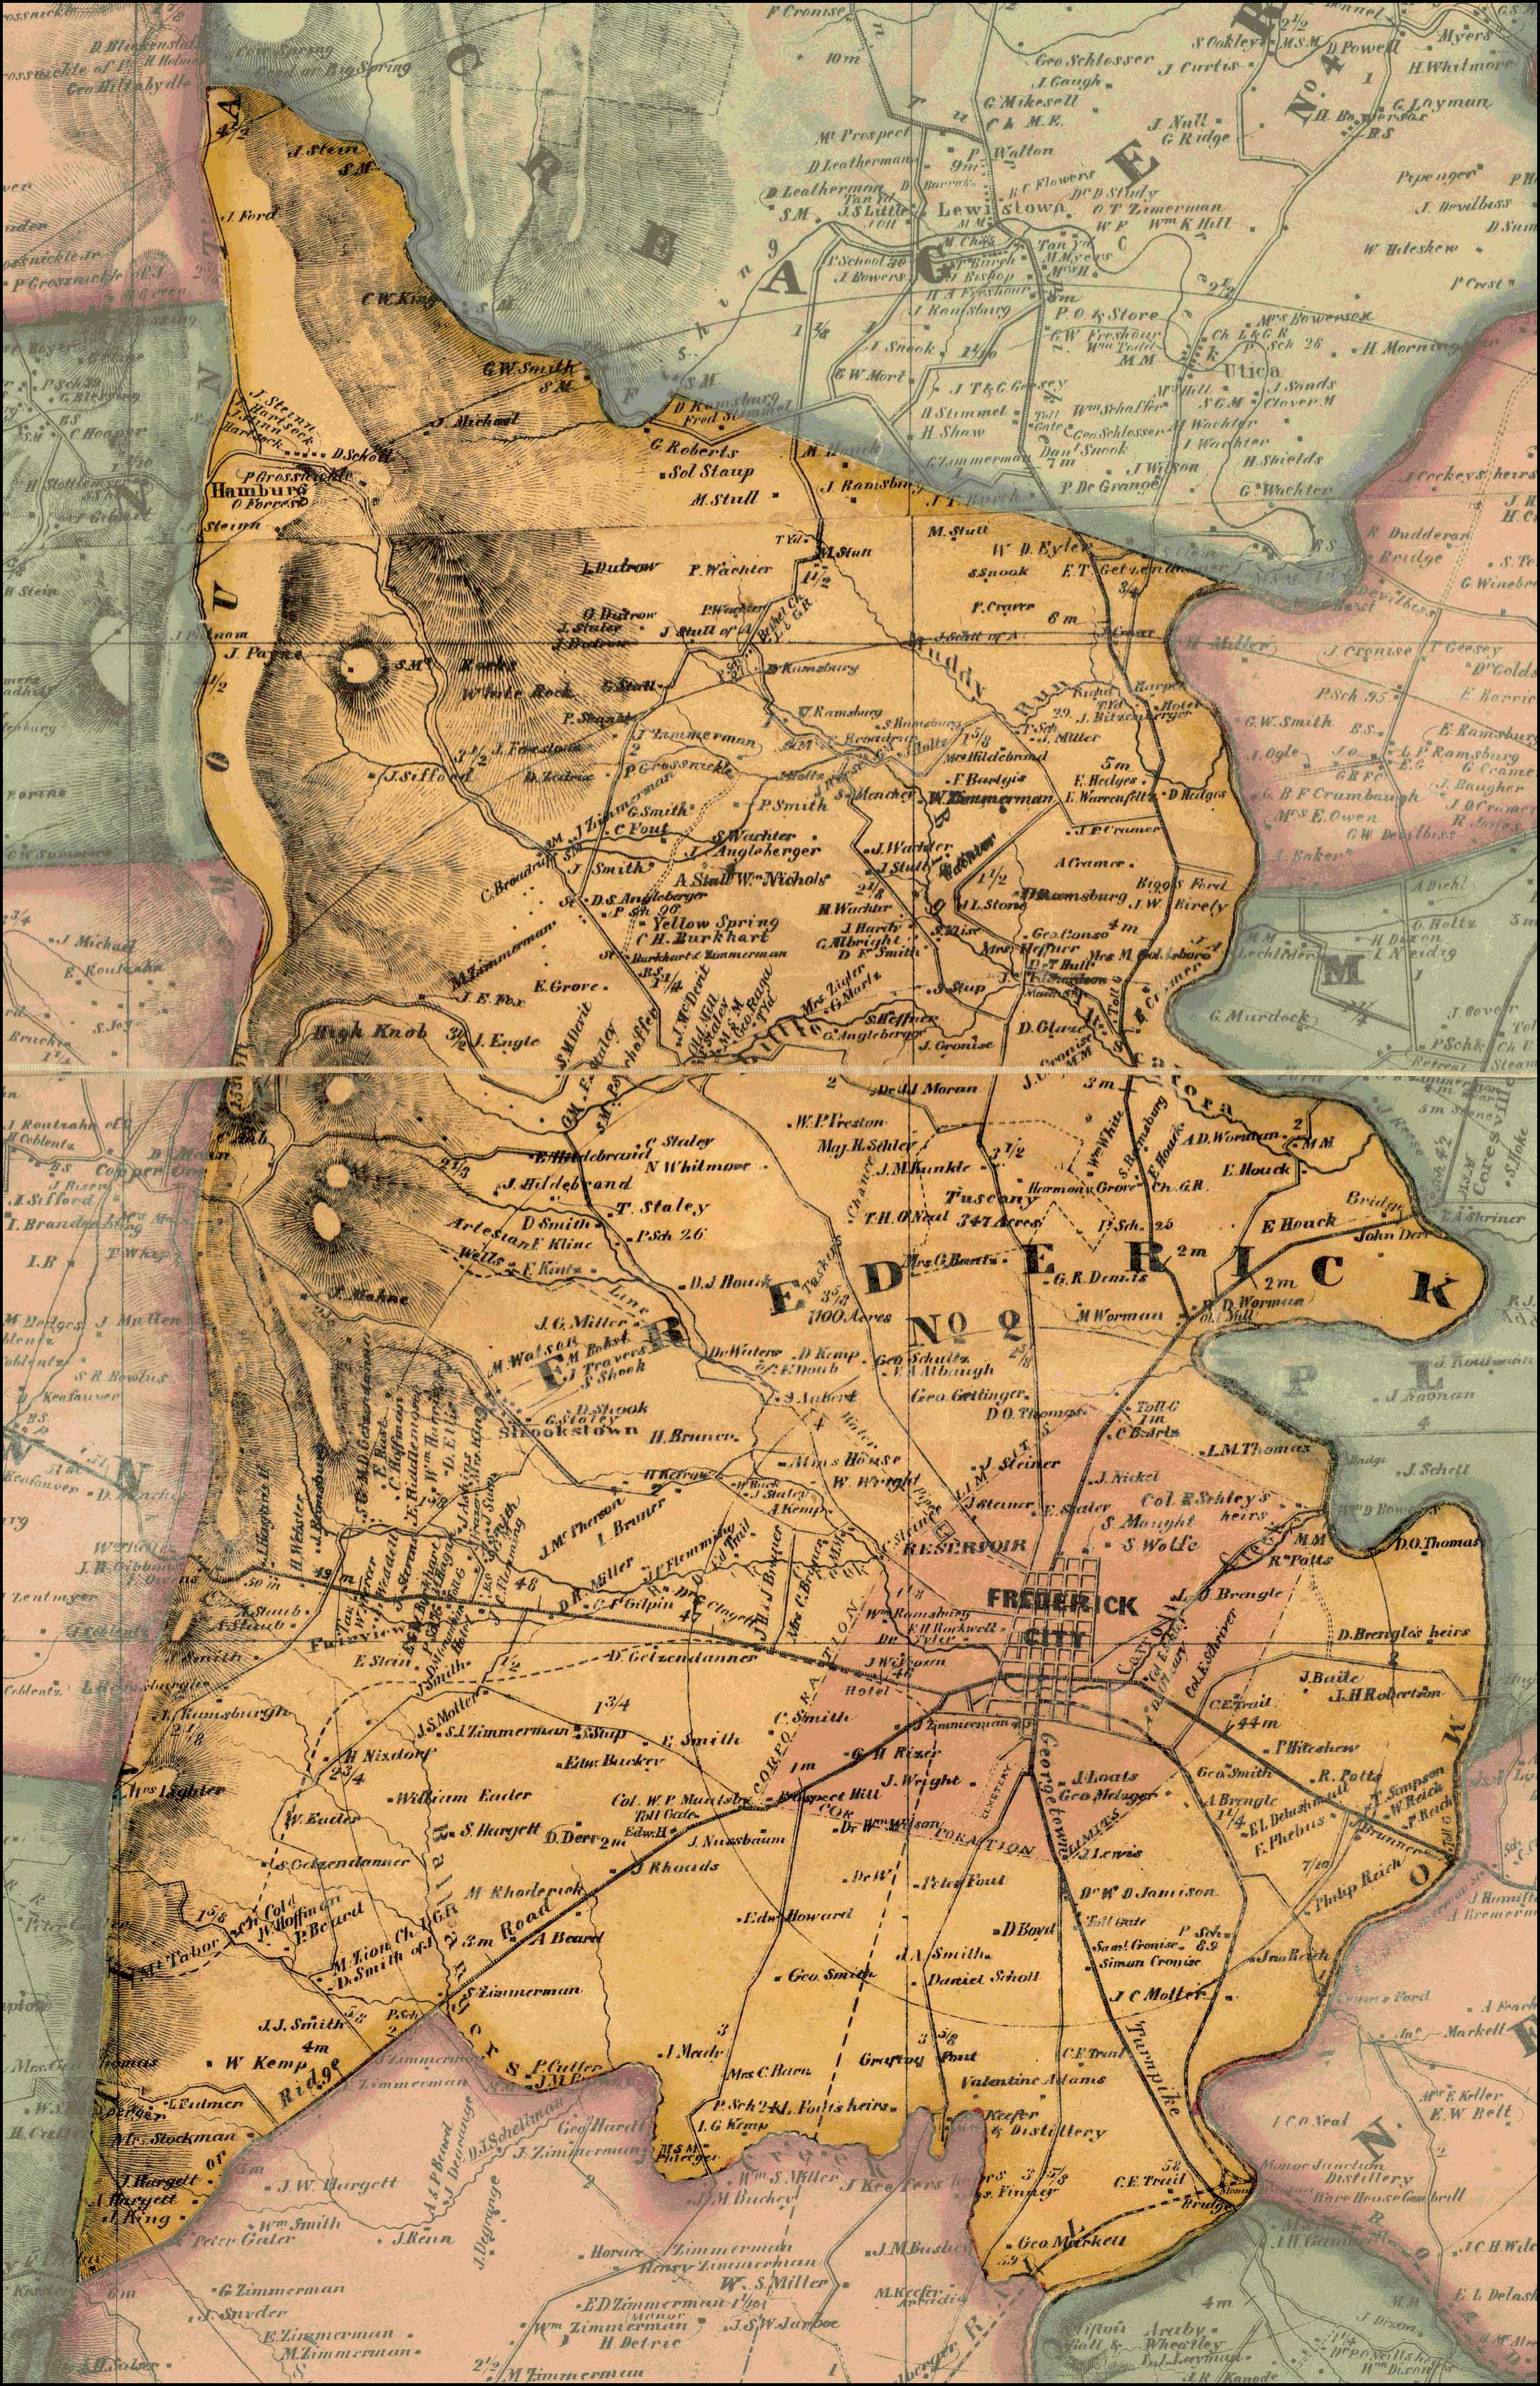 Isaac Bond, Map of Frederick County, 1858, Library of Congress, MSA SC 1213-1-457